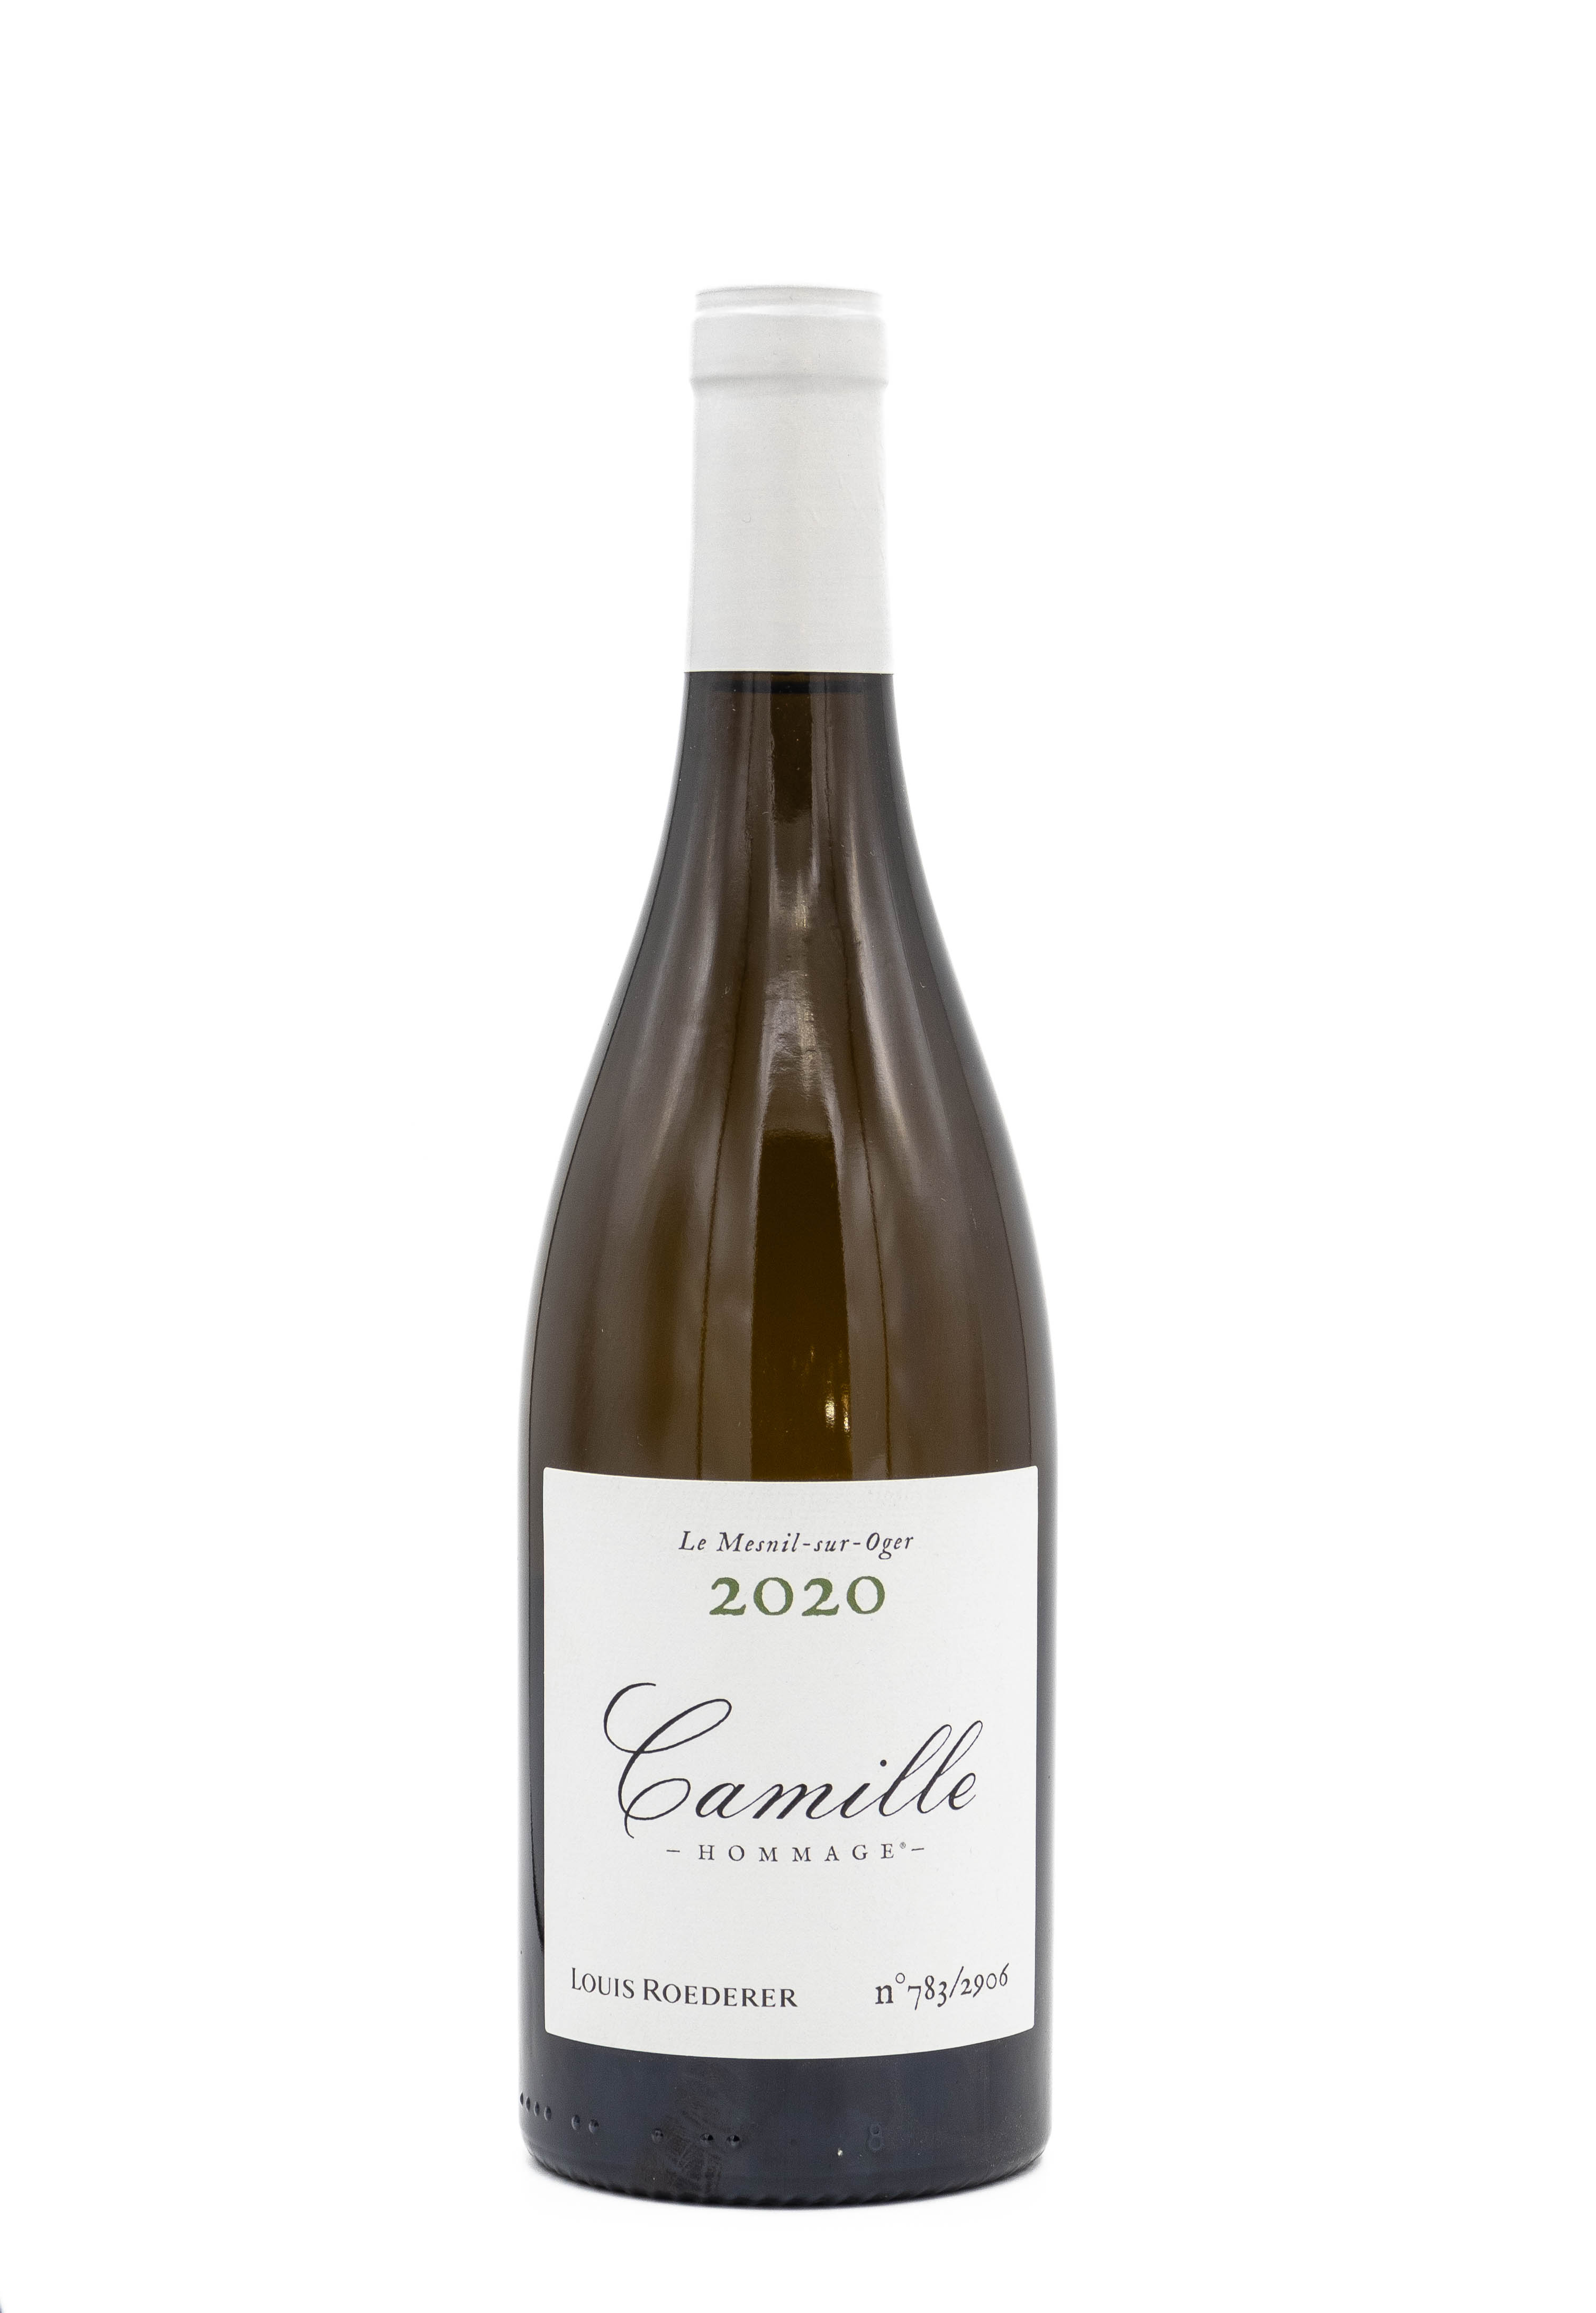 Louis Roederer Camille - Hommage- Les Volibarts blanc 2020